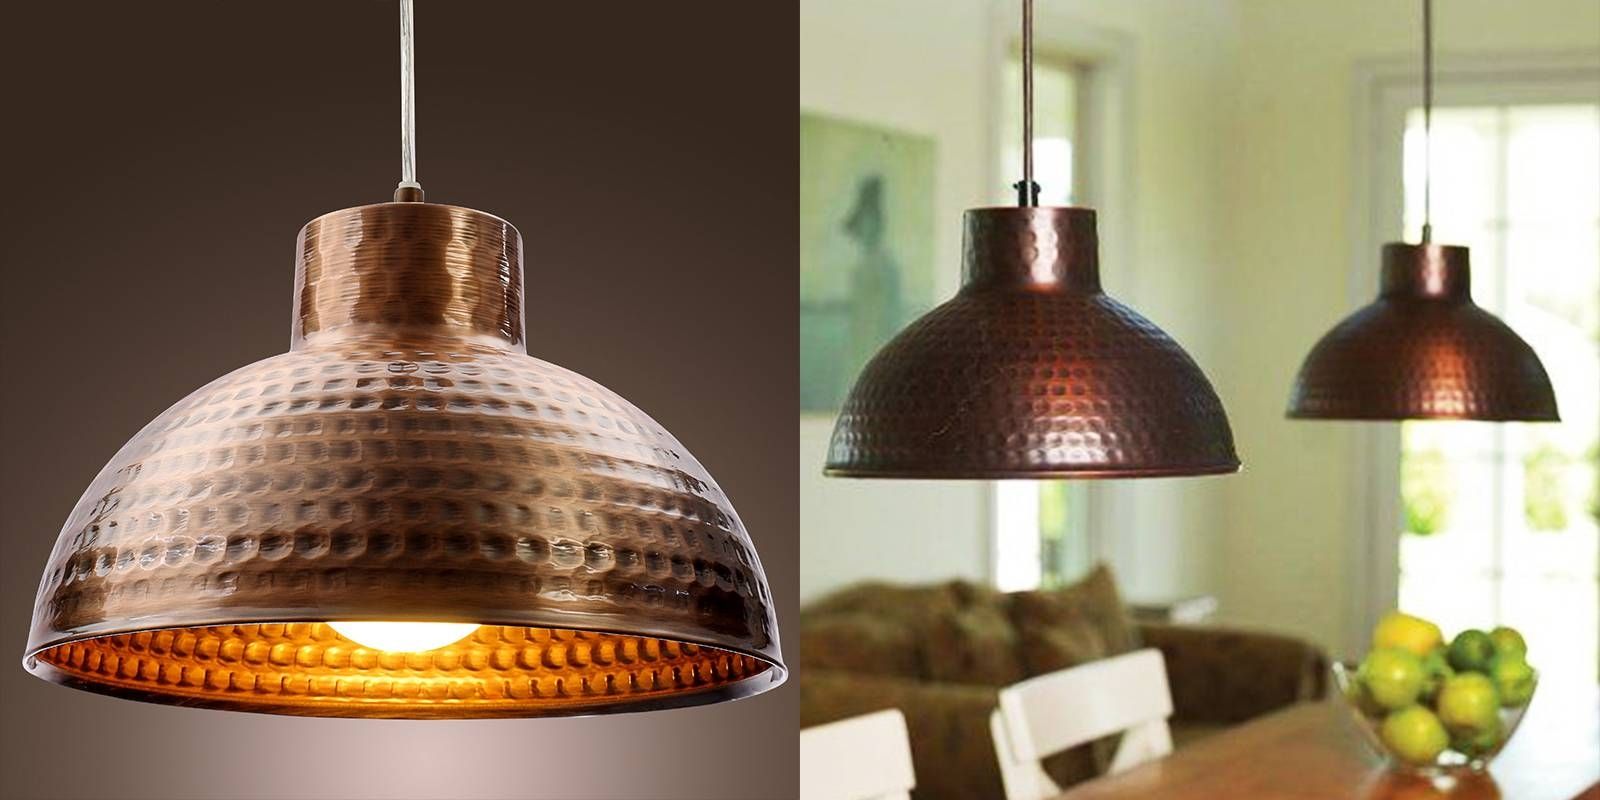 100+ Ideas Hammered Copper Lighting On Vouum With Regard To Hammered Copper Pendants (View 3 of 15)